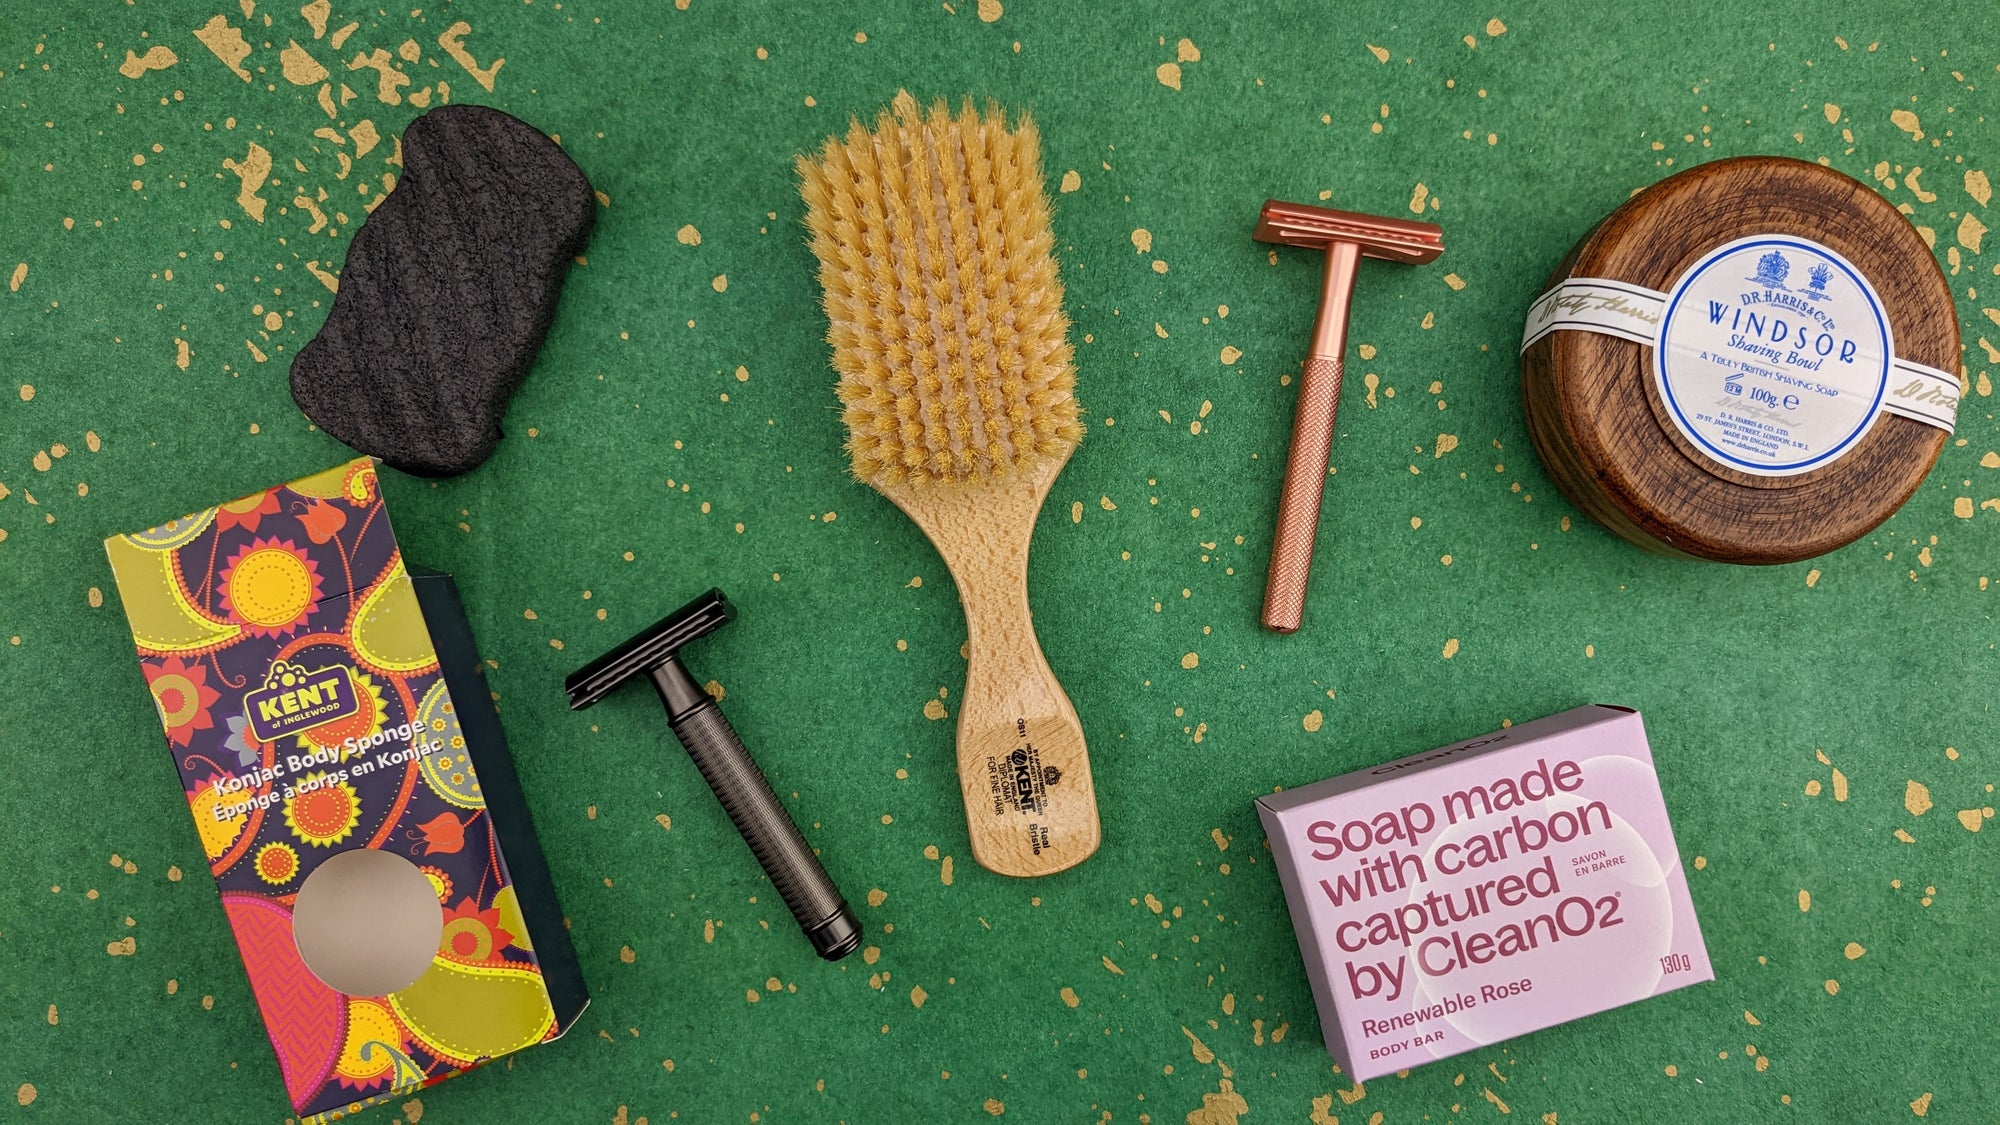 The Best Zero-Waste & Plastic Free Shaving & Grooming Gifts for Christmas 2022